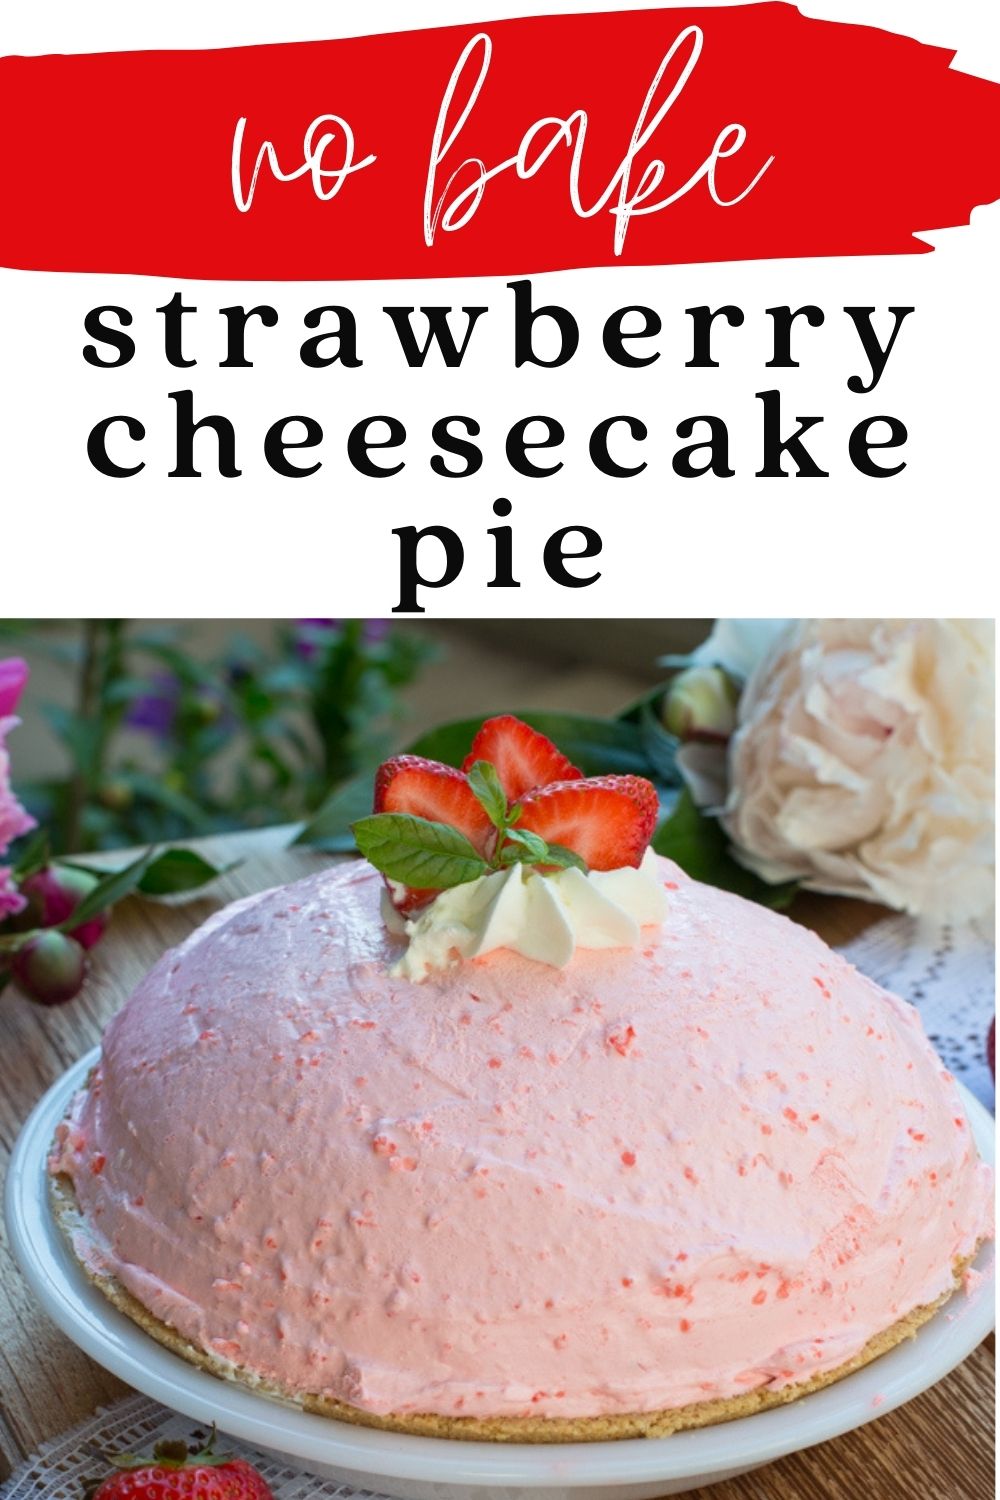 Creamy and fluffy, this No-Bake Strawberry Cheesecake Pie is a favorite summertime dessert. A graham cracker crust filled with fresh strawberries and a light strawberry cream cheese filling. via @artandthekitch